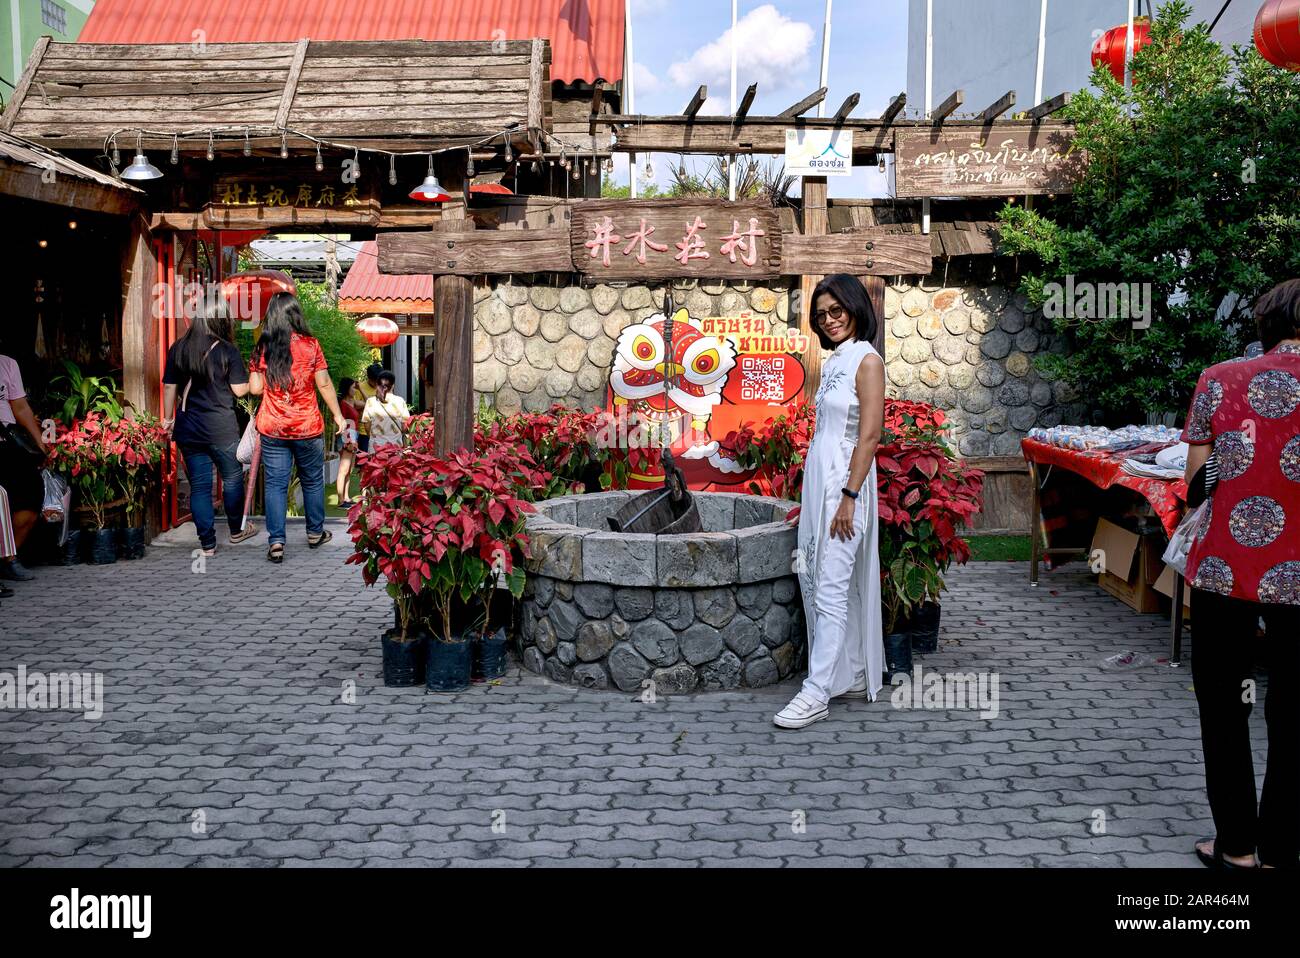 Woman dressed in áo dài traditional Vietnamese costume, posing for a photograph against a Chinese venue backdrop Stock Photo